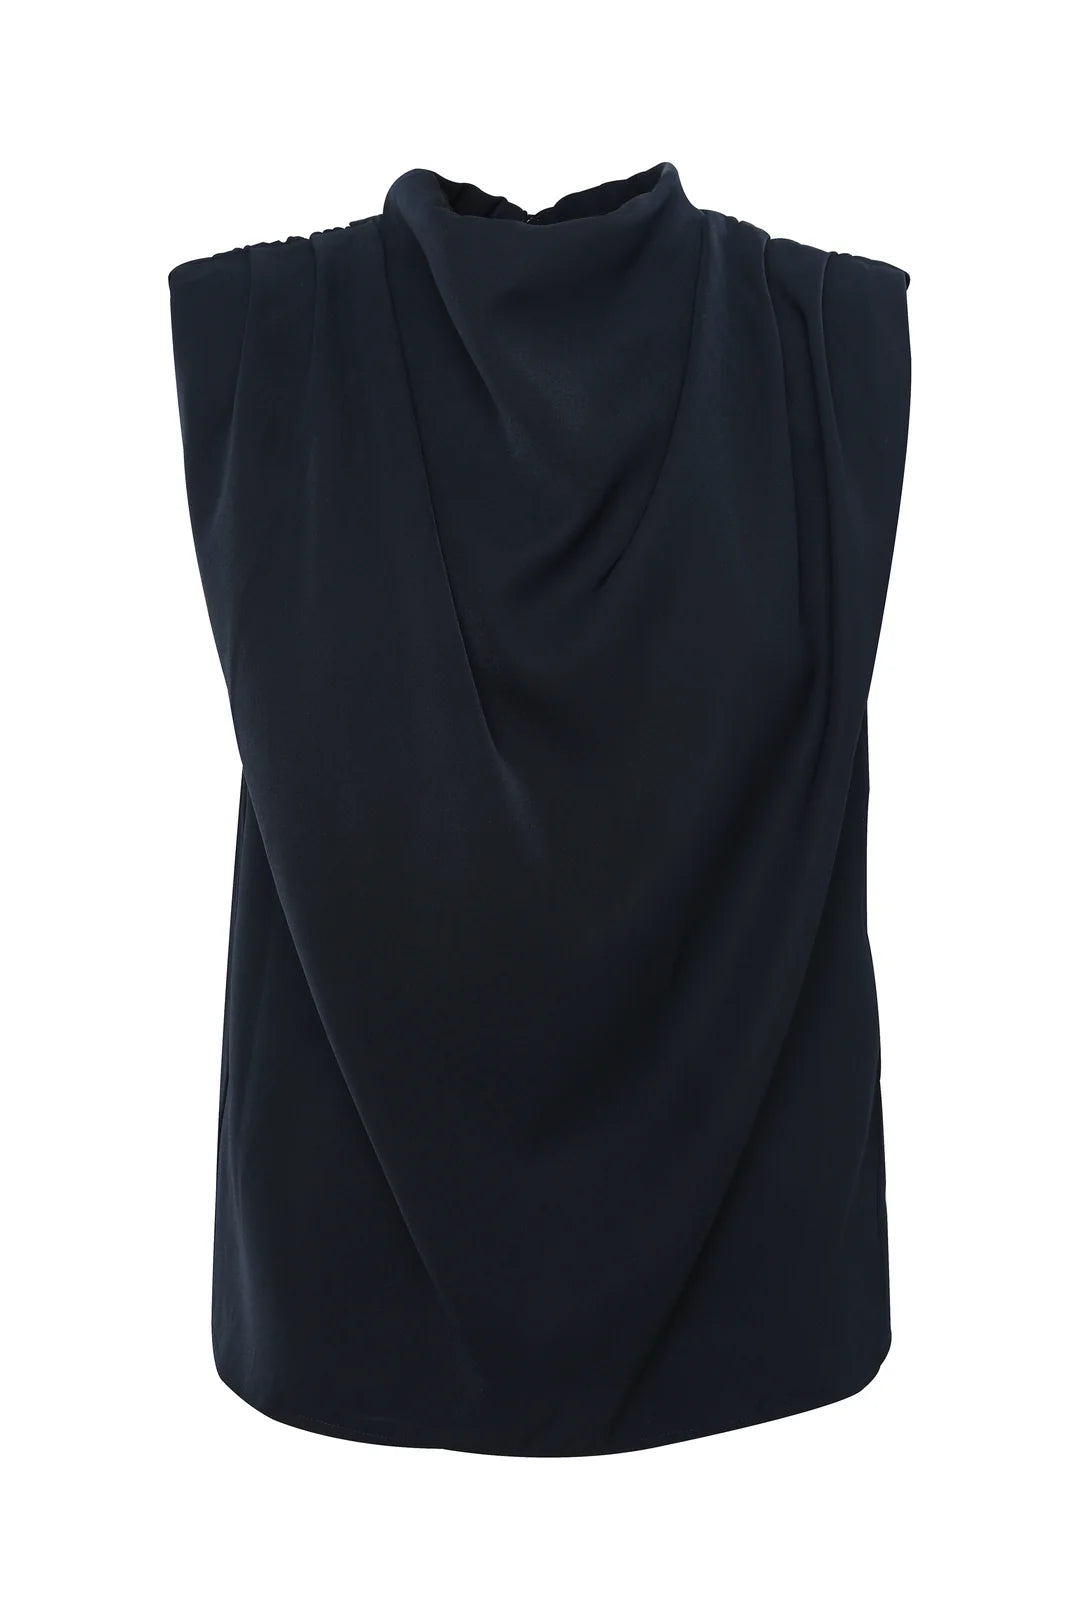 The Dare To Dream Top, navy